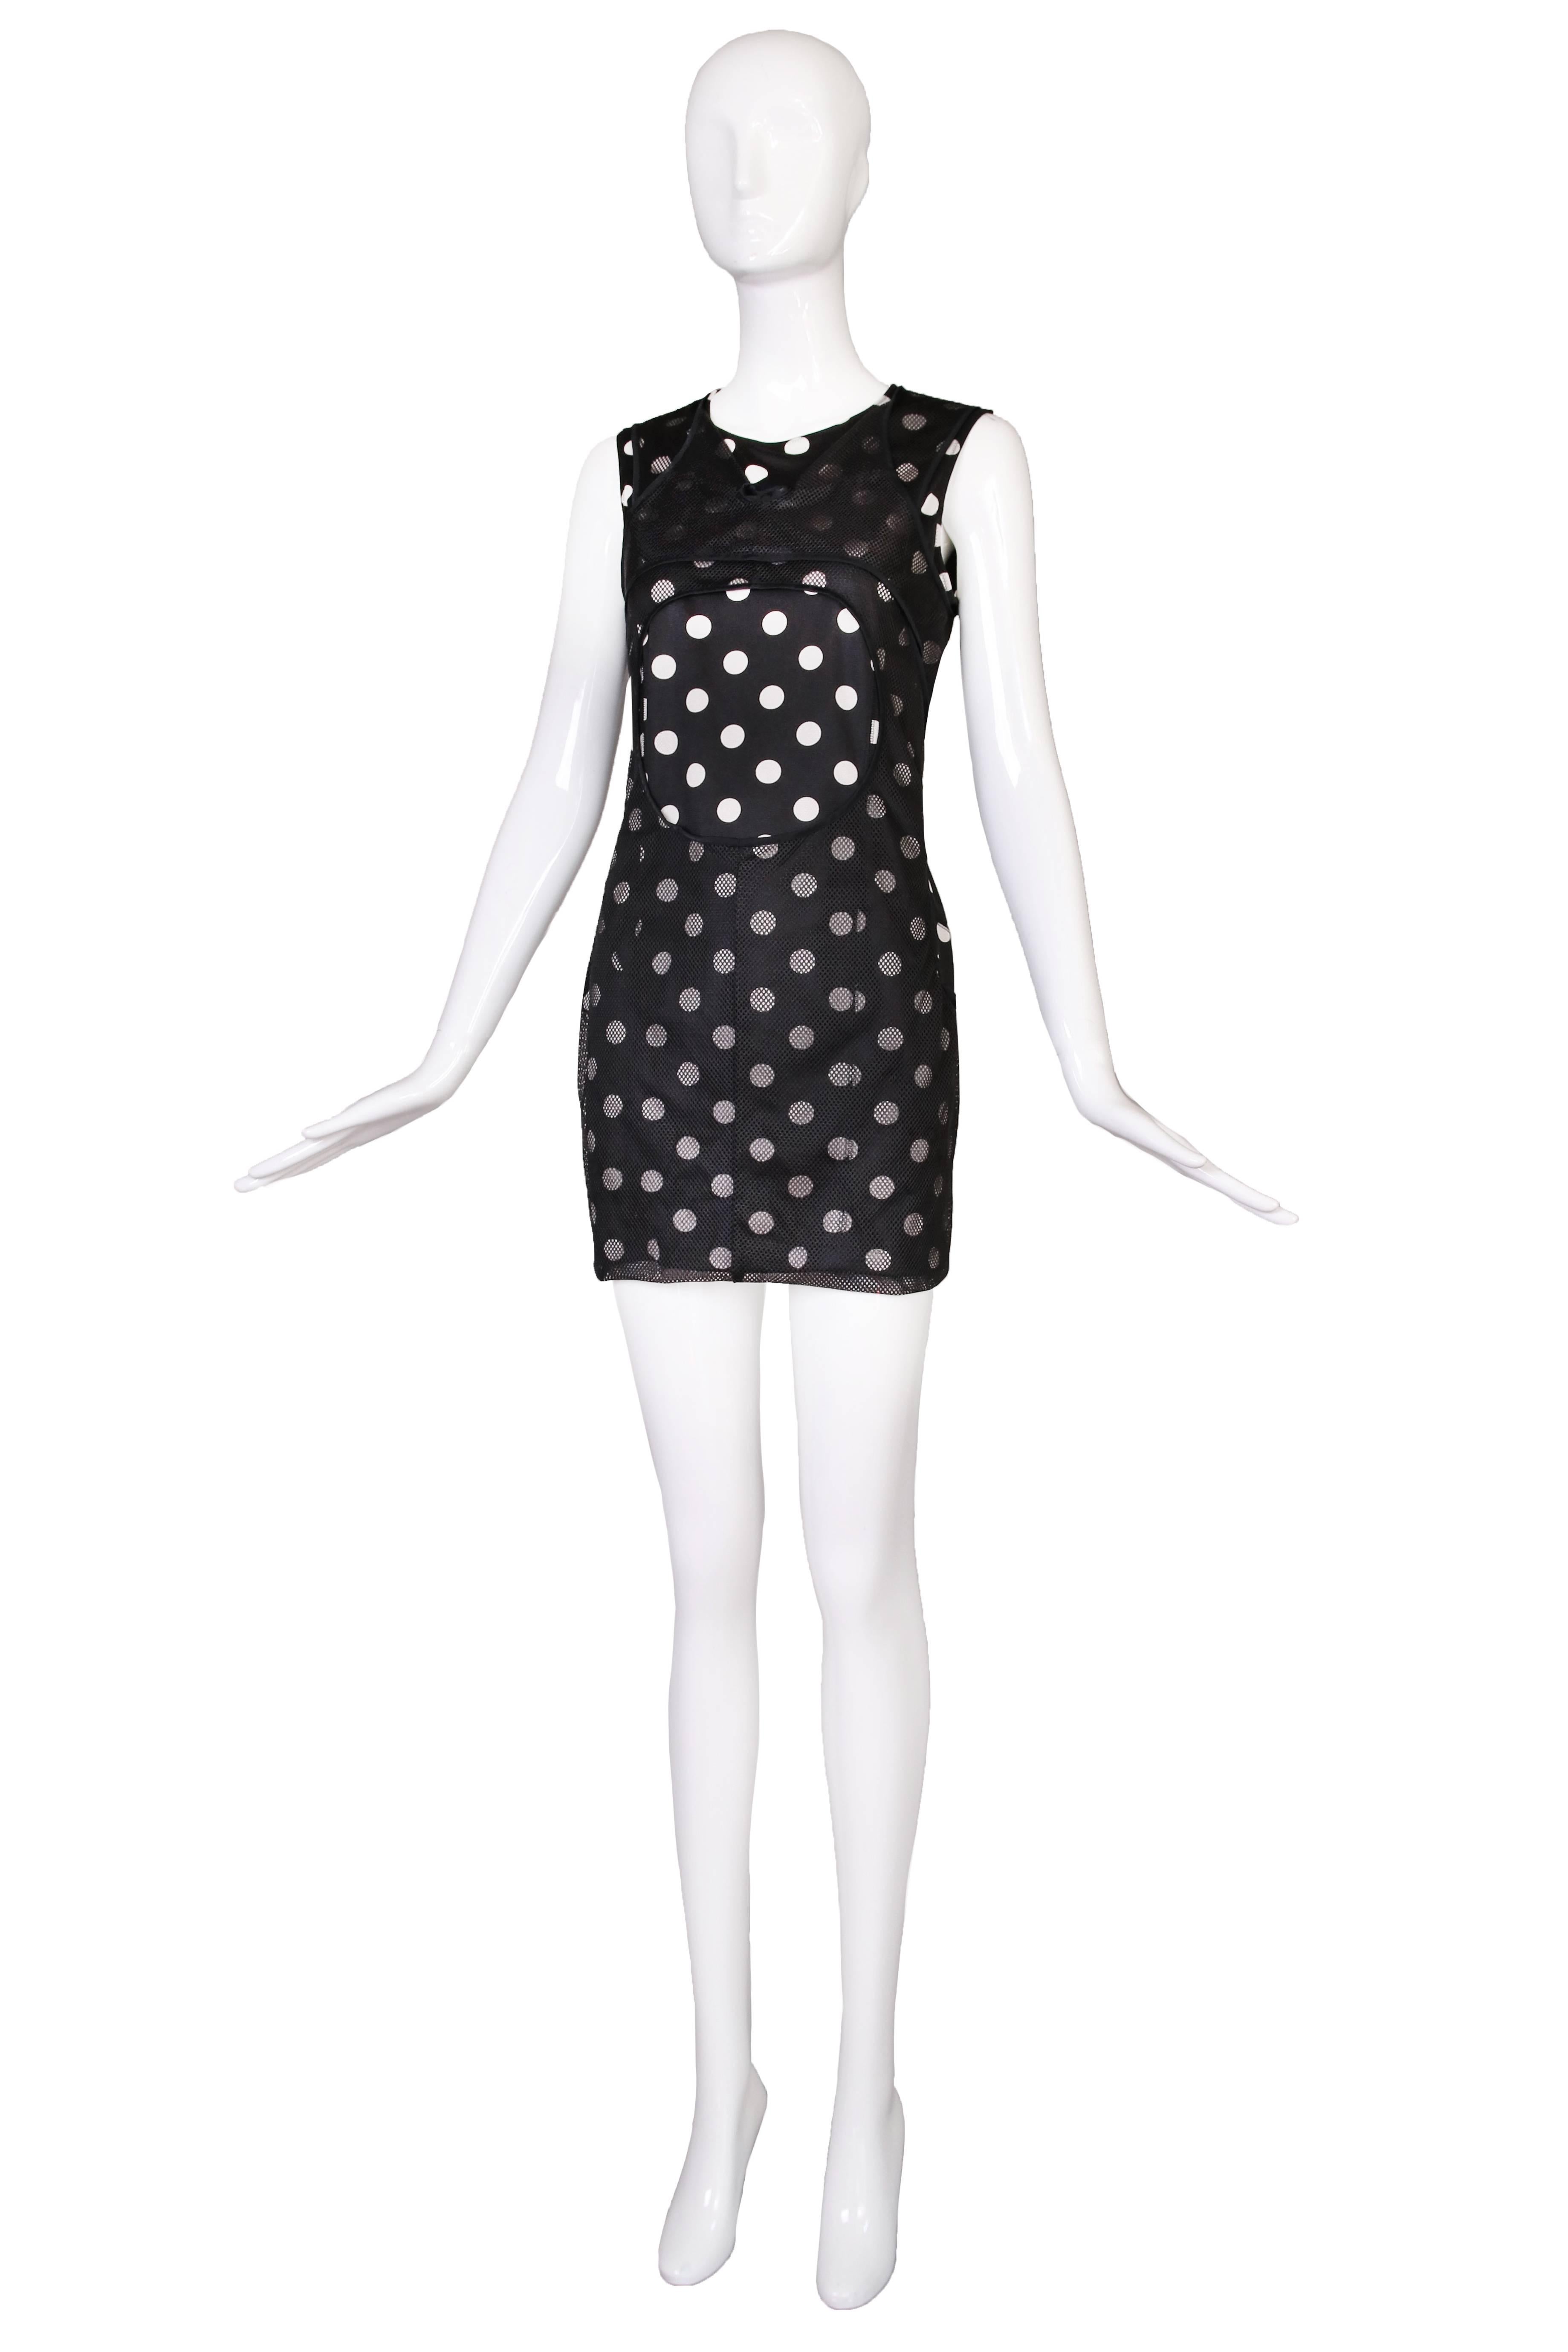 Junya Watanabe for Comme des Garcons sleeveless black and white polkadot stretch bodycon mini dress with mesh overlay featuring a circular cutout mid-bodice. In excellent condition. Size M.
MEAUREMENTS:
Bust - 36/38